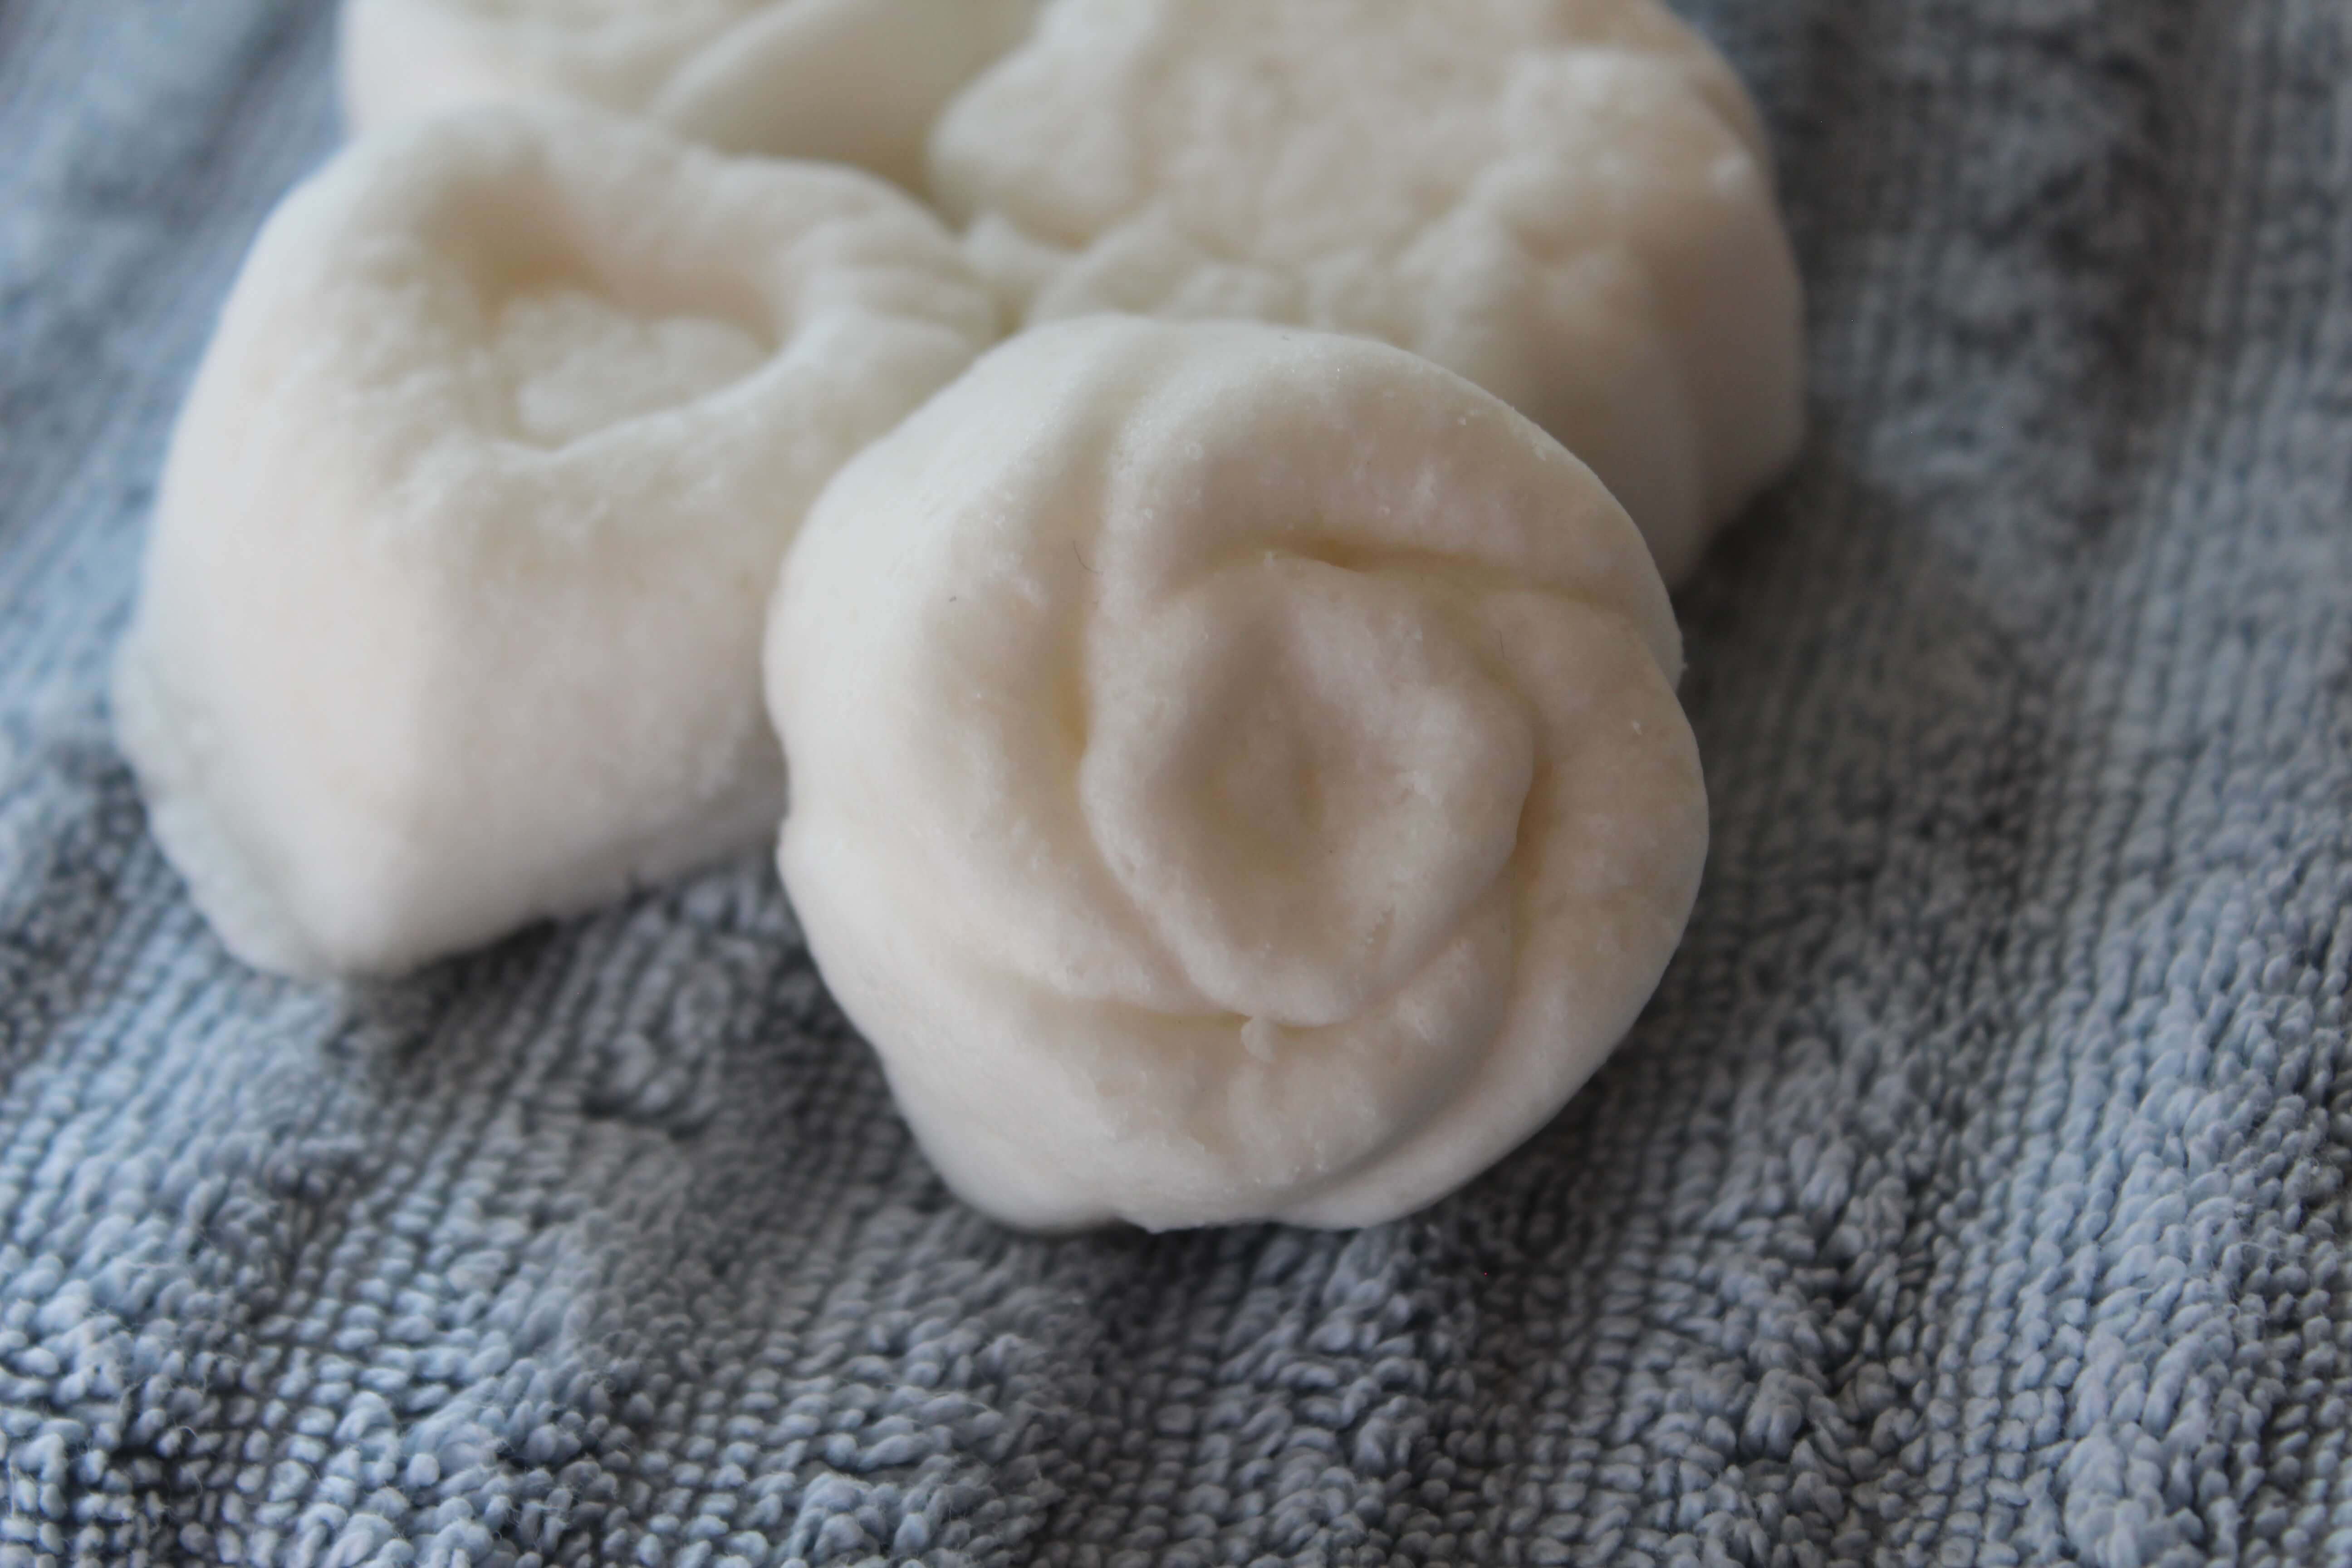 Bath Bomb Recipe Made with Shea Butter